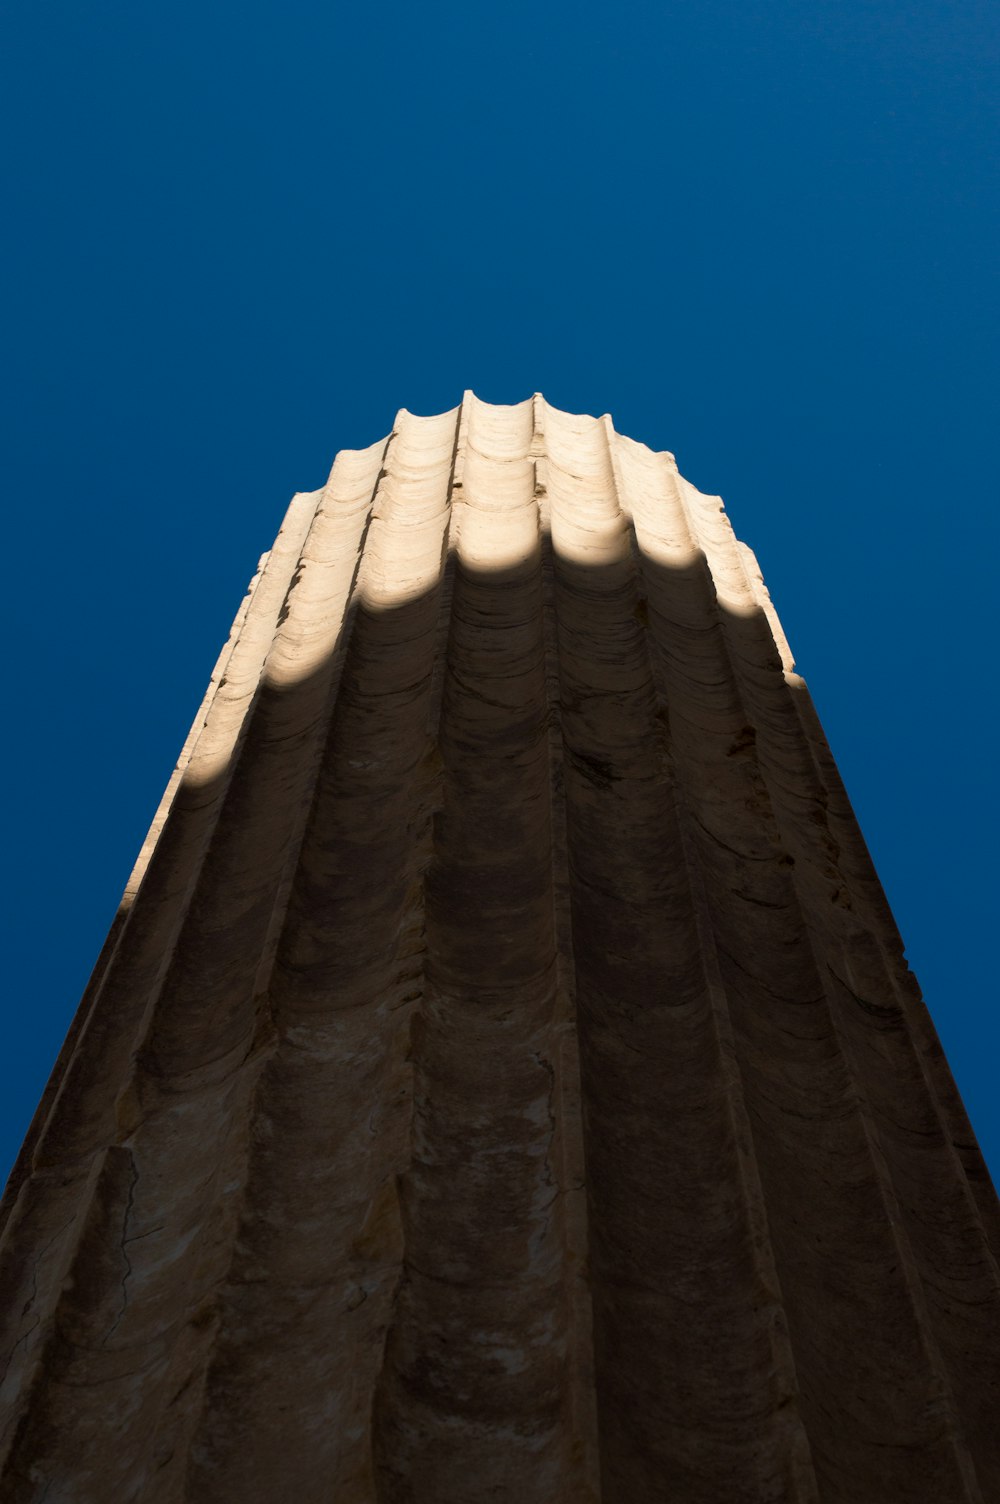 the top of a tall building with a blue sky in the background